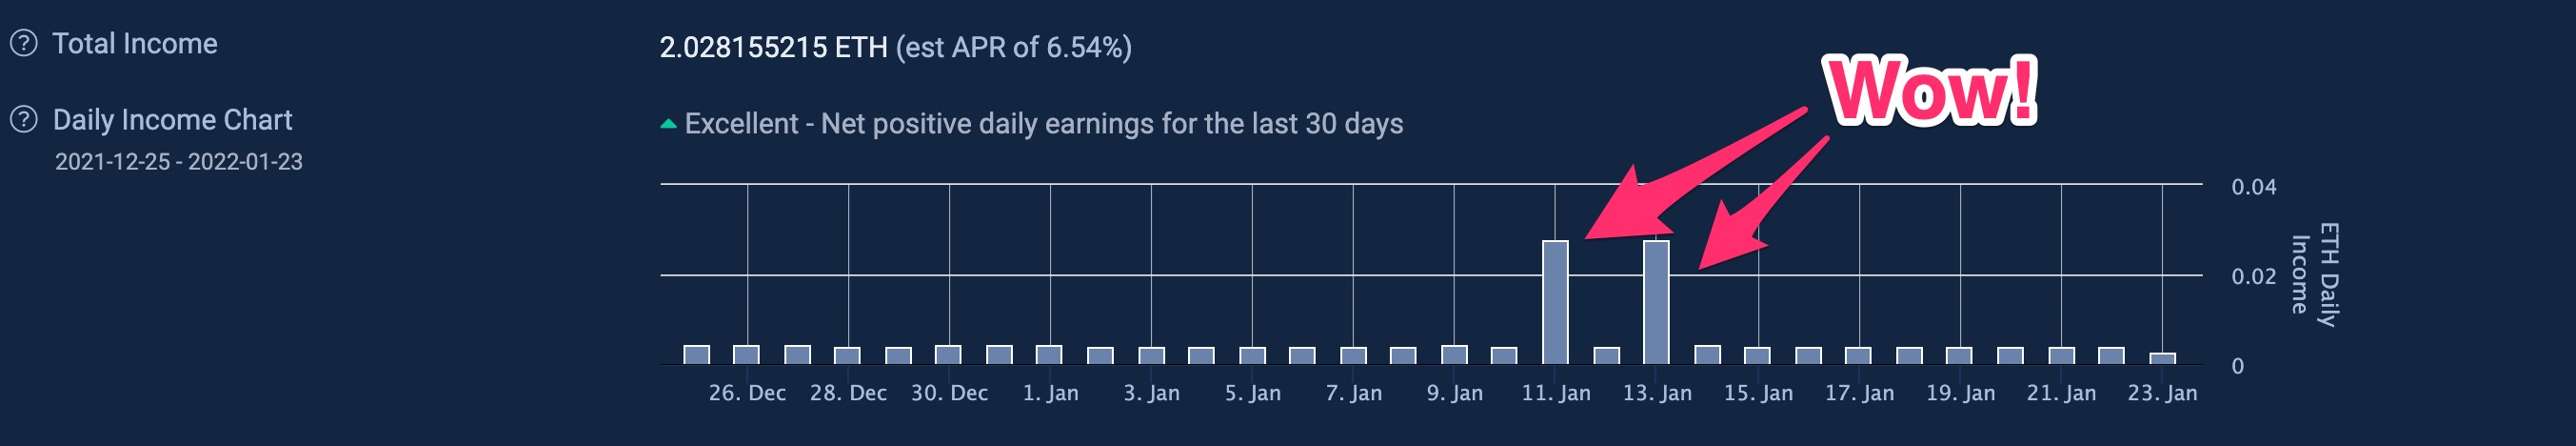 a bar graph showing an entire month of small daily earnings, plus 2 days with extremely high earnings